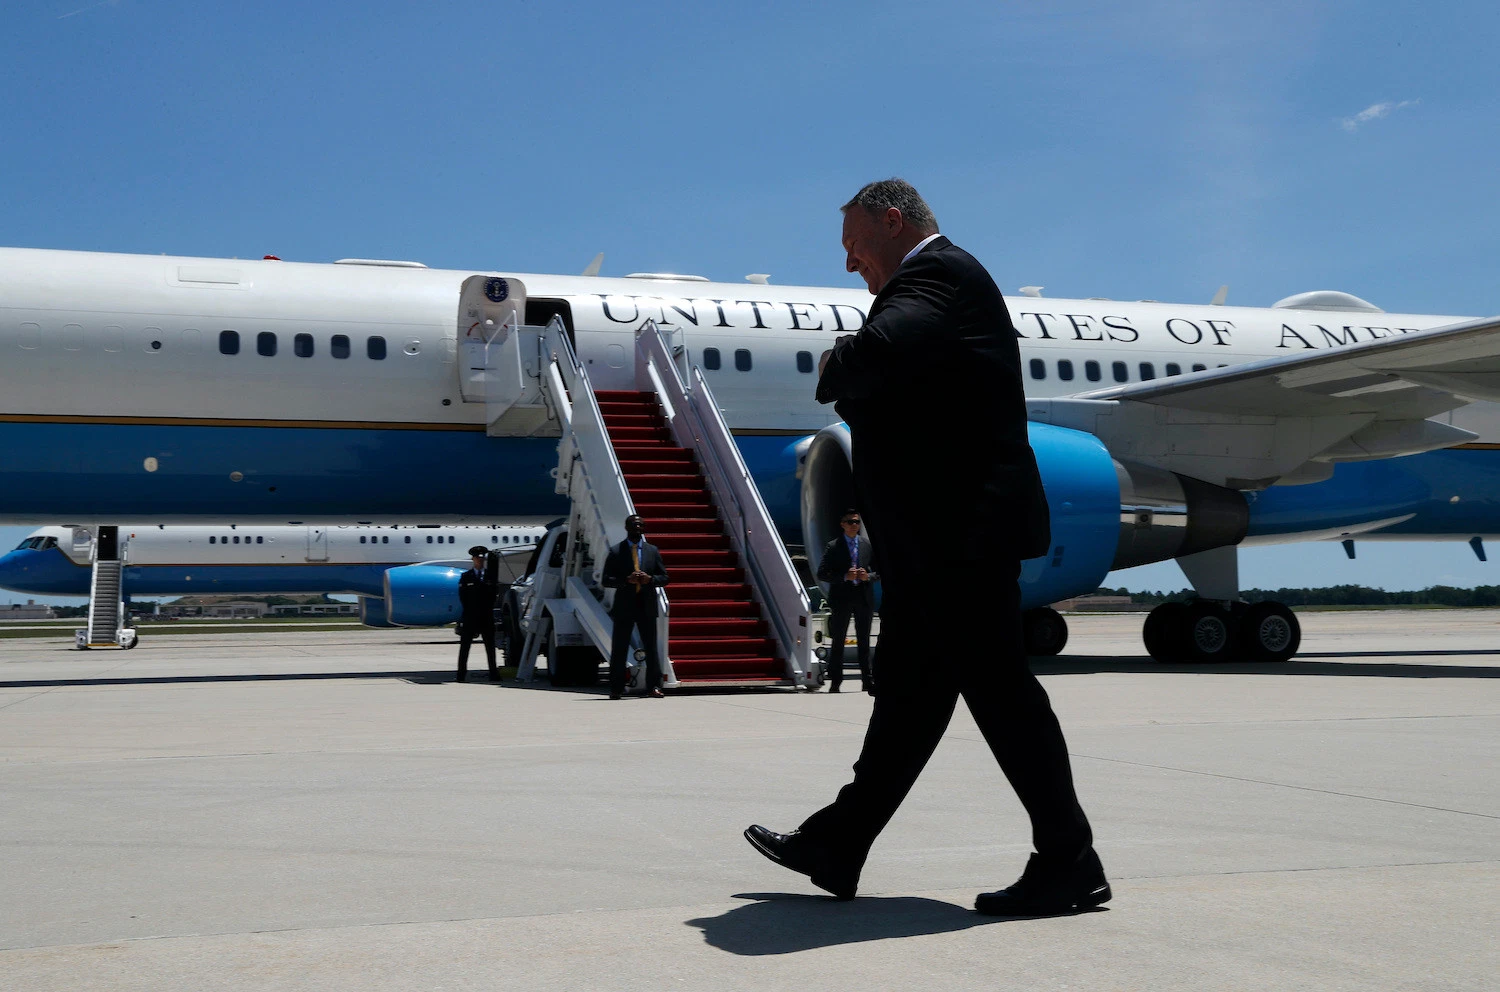 U.S. Secretary of State Mike Pompeo walks by the media as he prepares to board a plane at Andrews Air Force Base near Washington, D.C., on June 23, 2019. JACQUELYN MARTIN/AFP VIA GETTY IMAGES